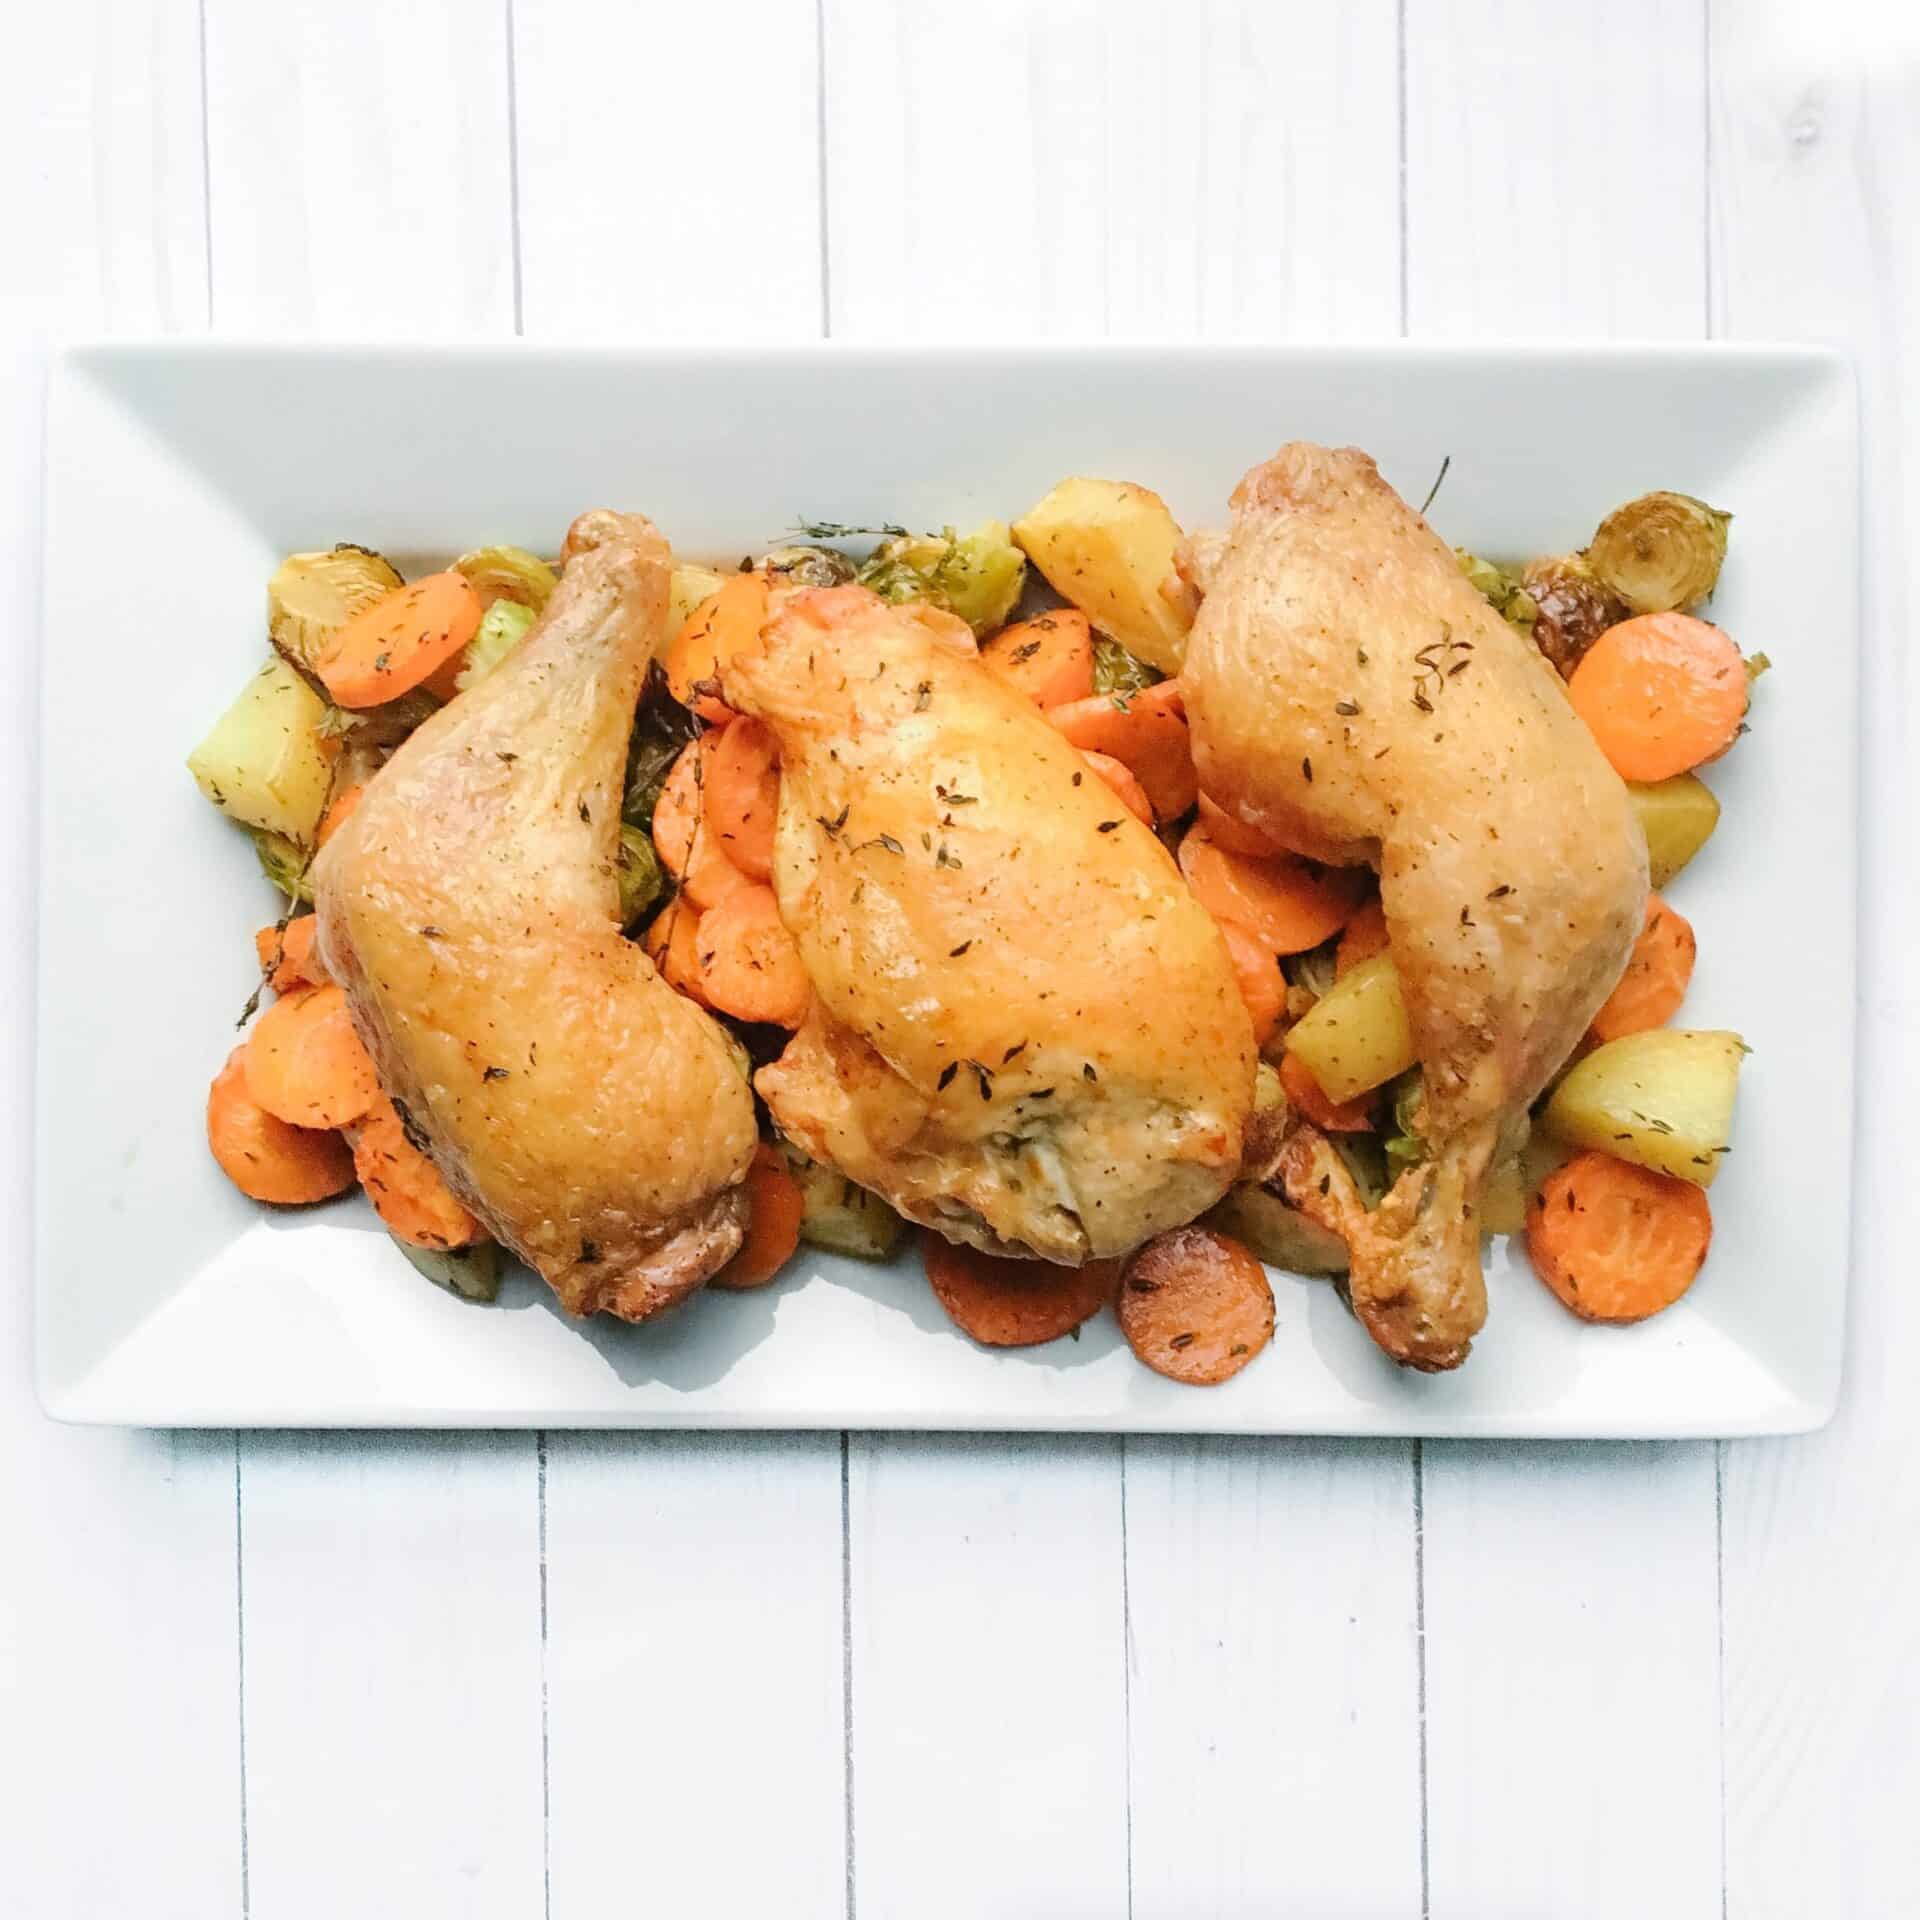 Easy Roasted Chicken, Carrots and Brussels